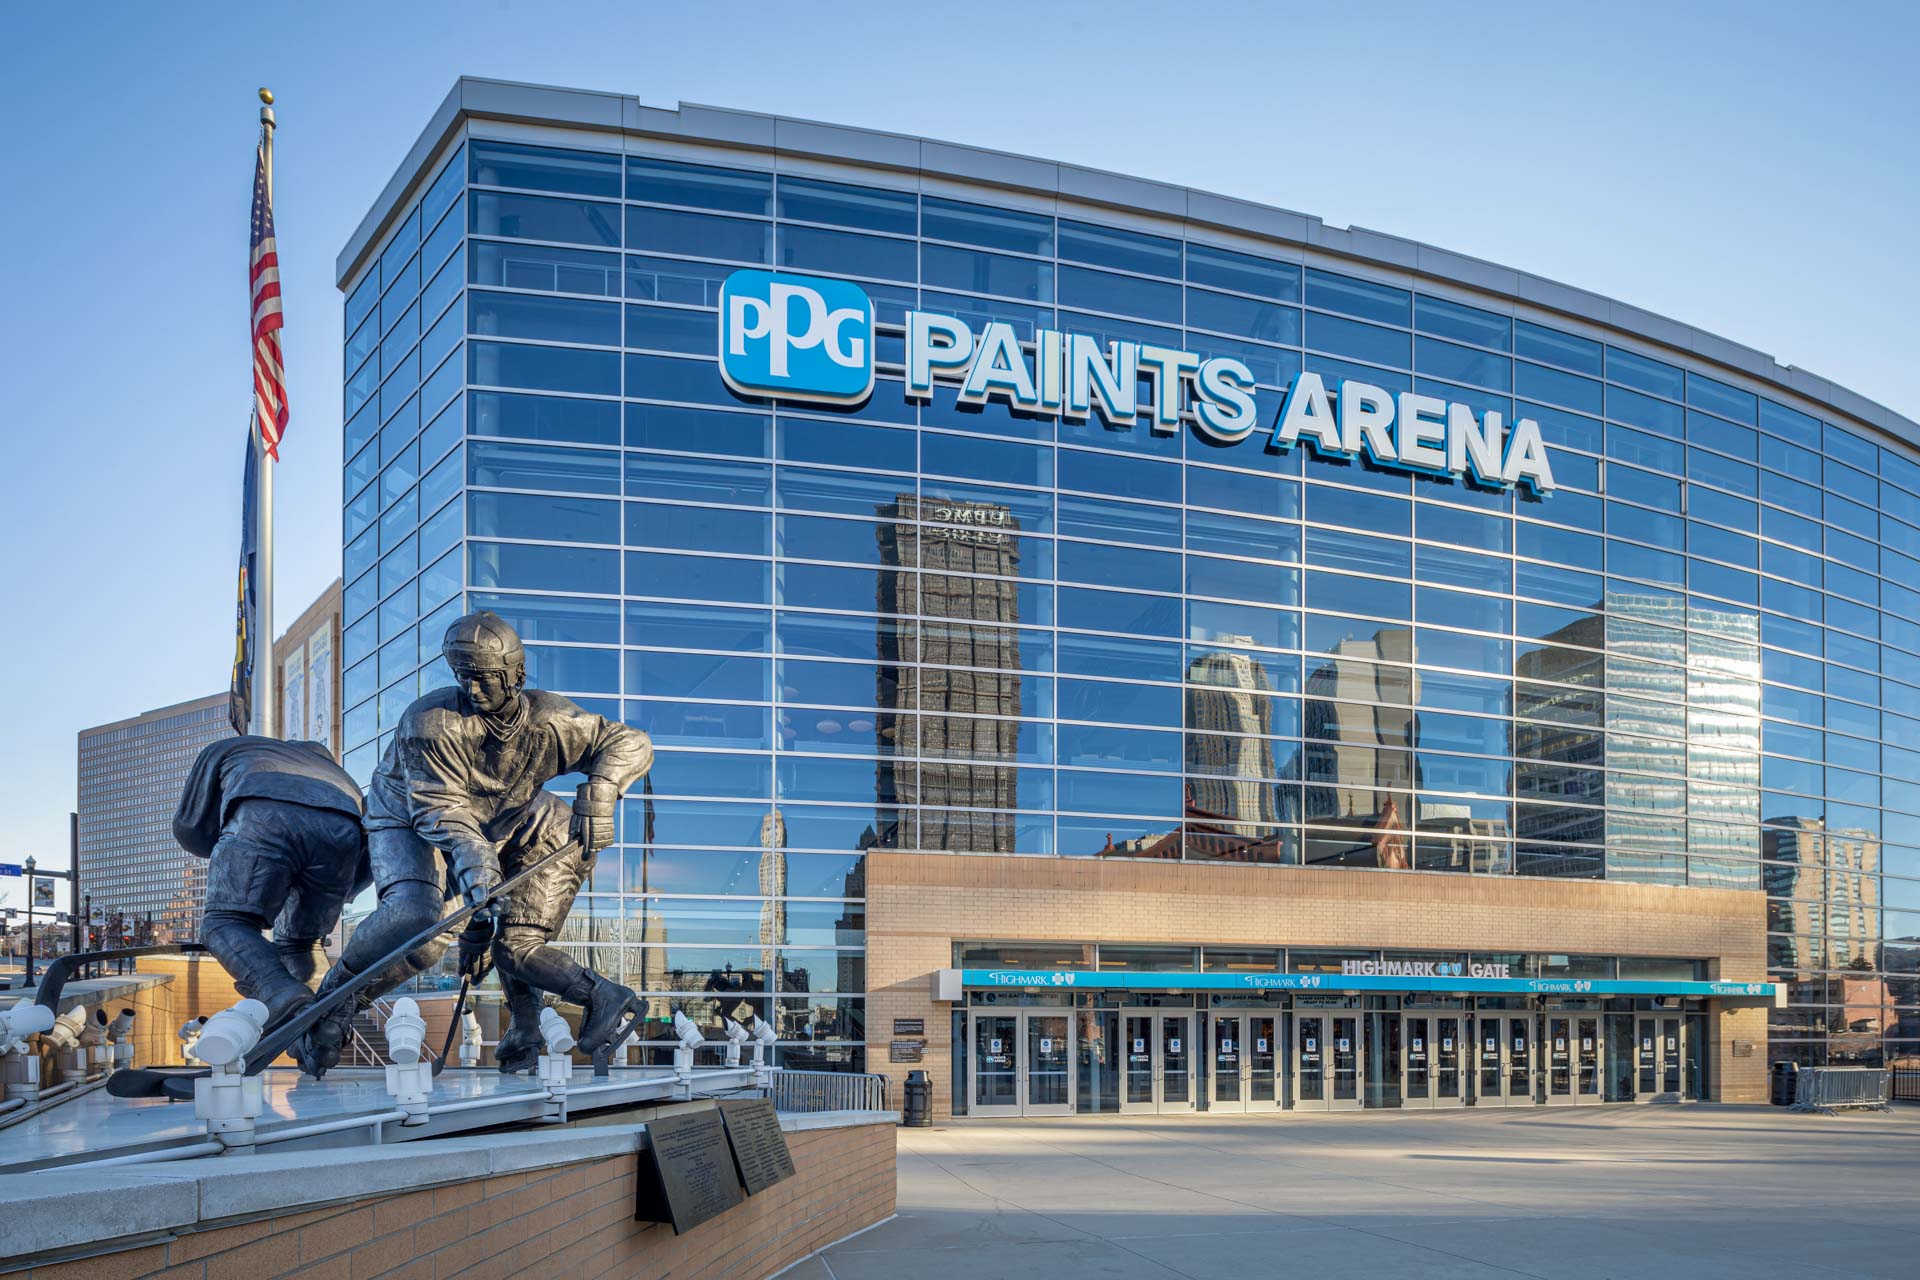 In Enemy Territory – A Road Review Of PPG Paints Arena